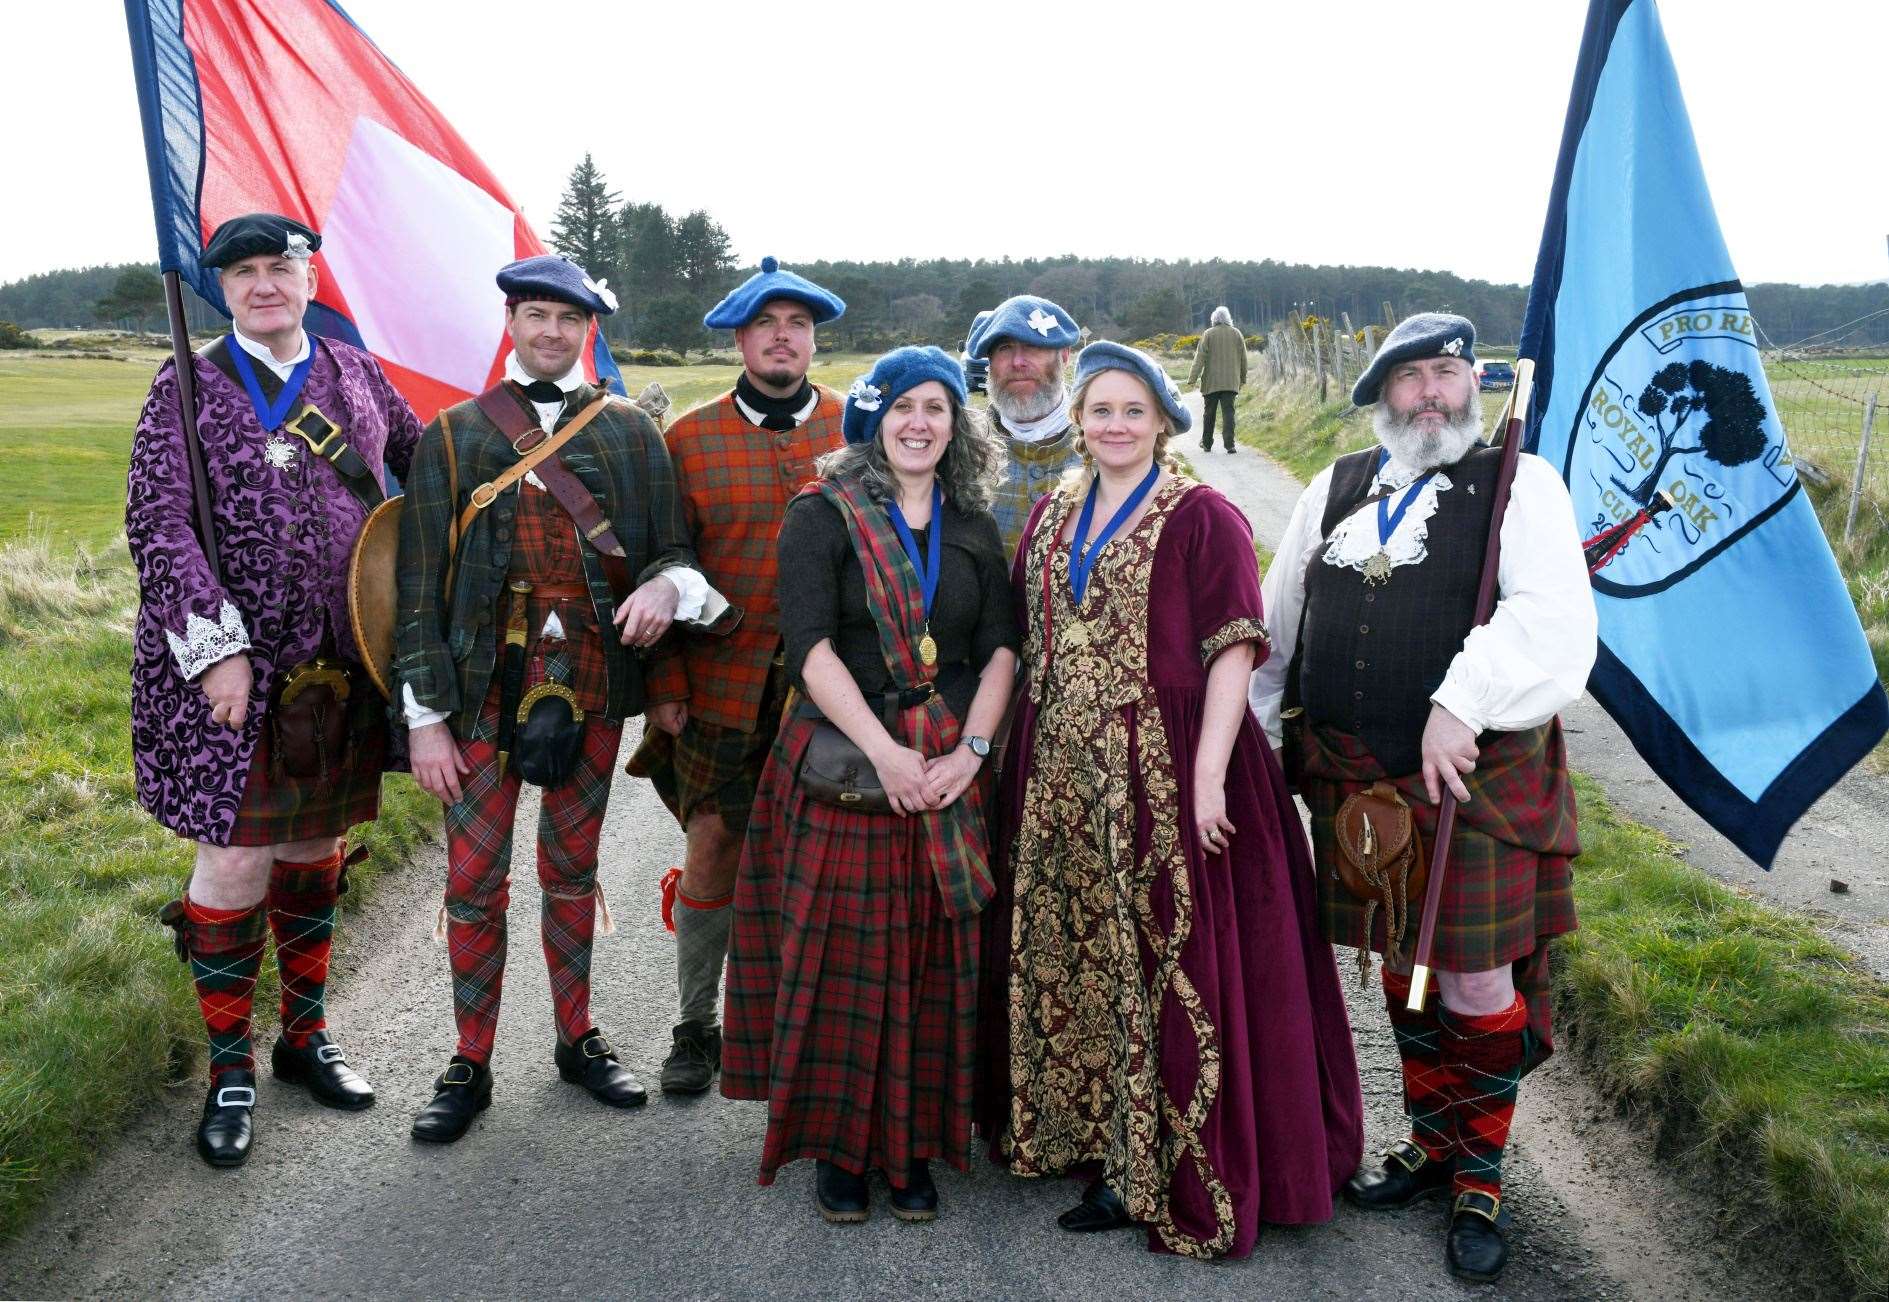 A reenactment group added colour and vibrancy to the ceremony. Picture: James Mackenzie.